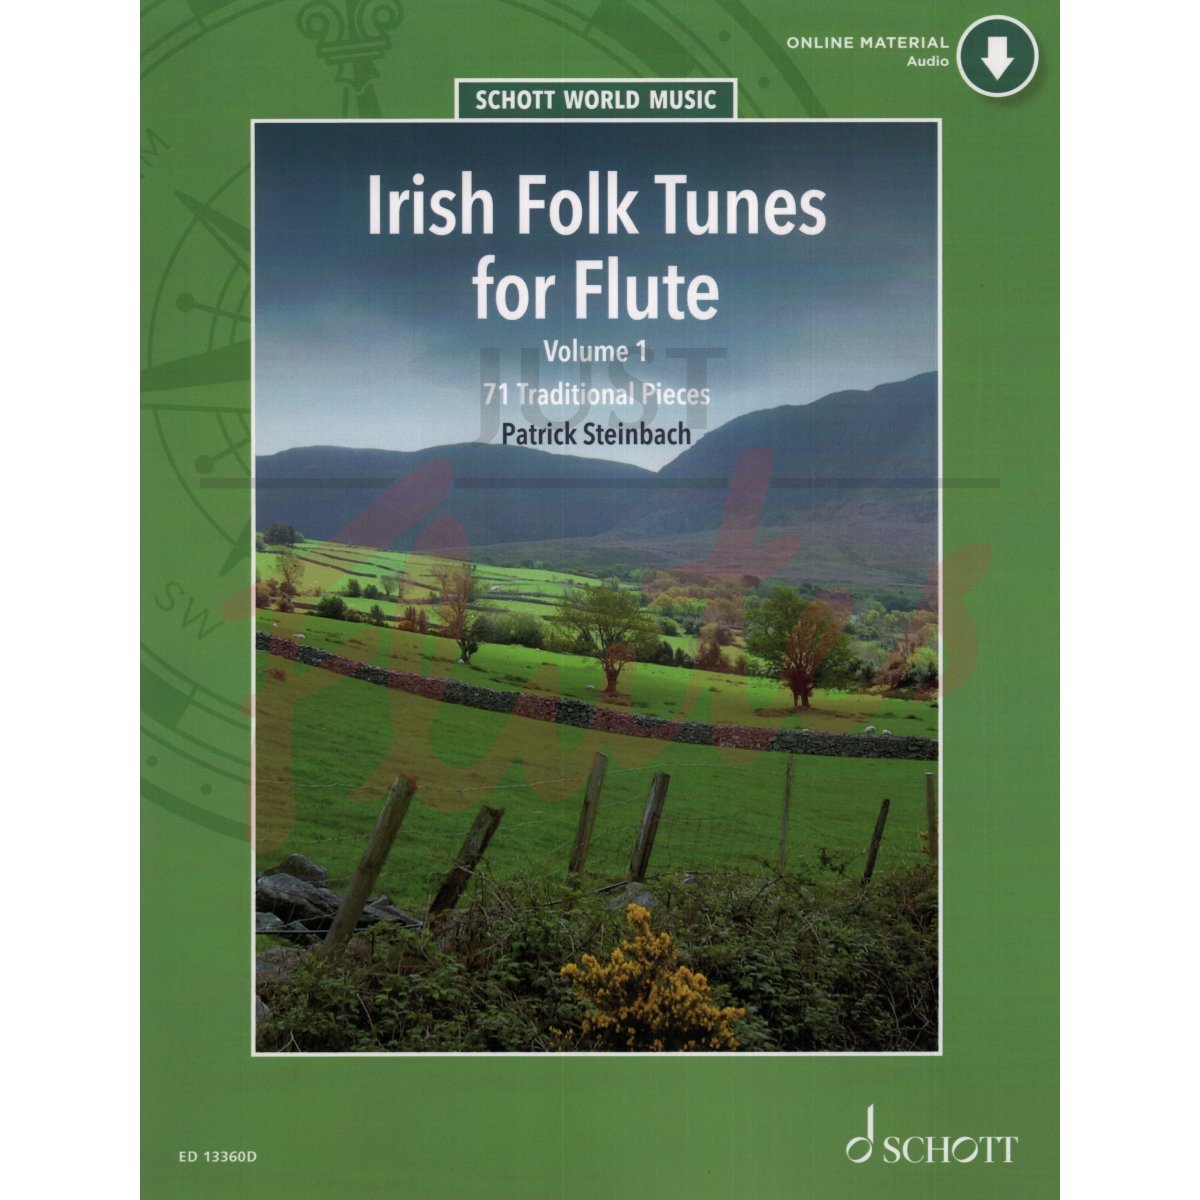 Irish Folk Tunes for Flute, Volume One (includes Online Audio) Edited by P.  Steinbach. Just Flutes